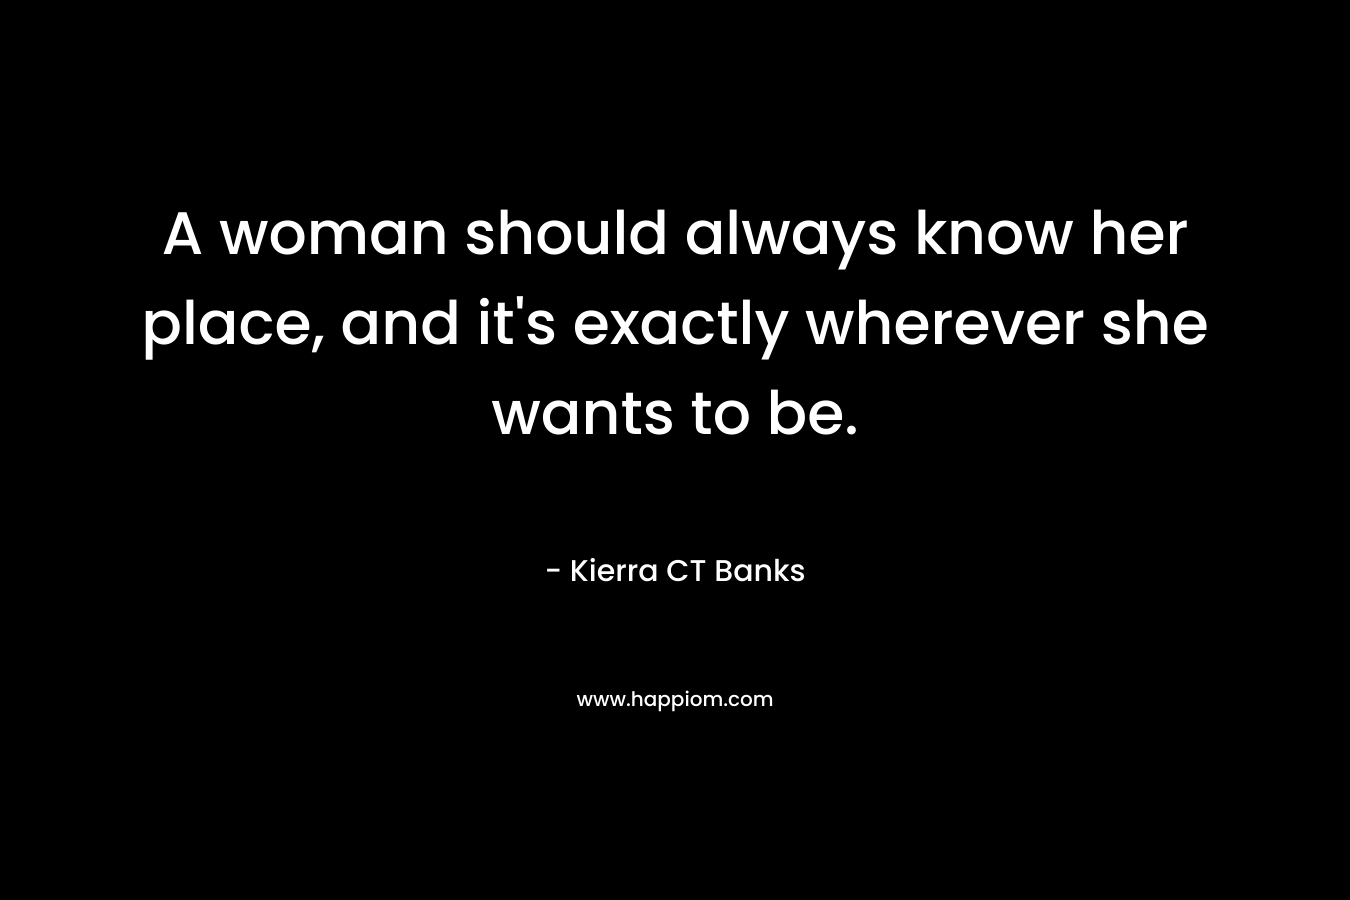 A woman should always know her place, and it’s exactly wherever she wants to be. – Kierra CT Banks